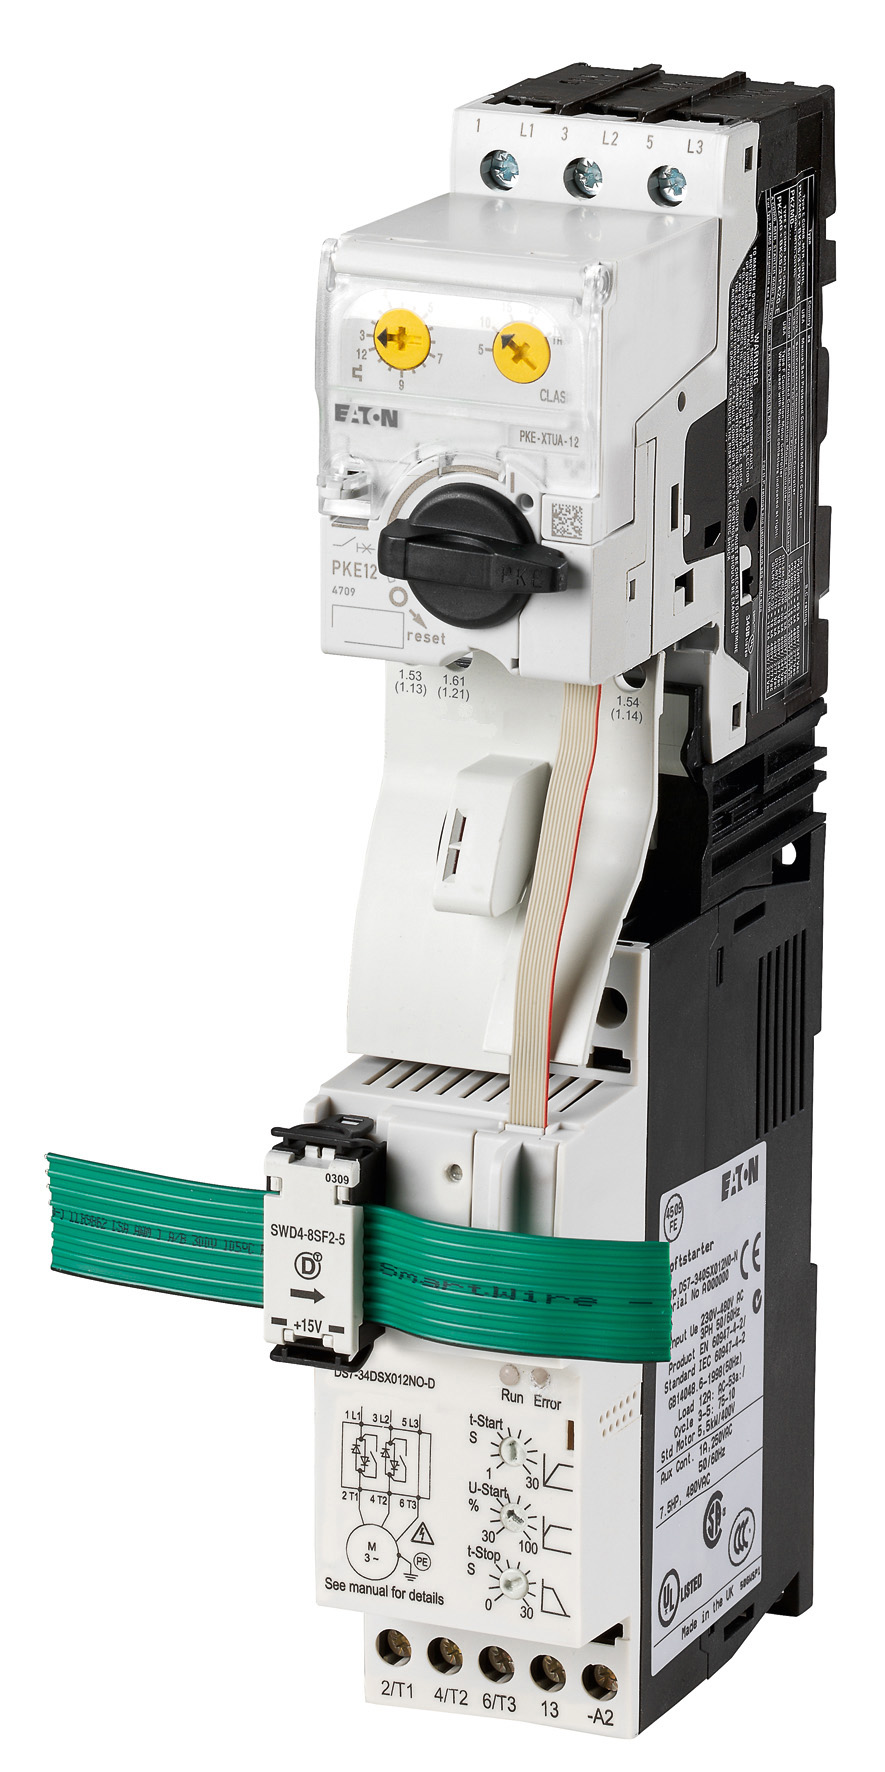 Now Eaton Soft Starters Cut Wiring Time And Cost